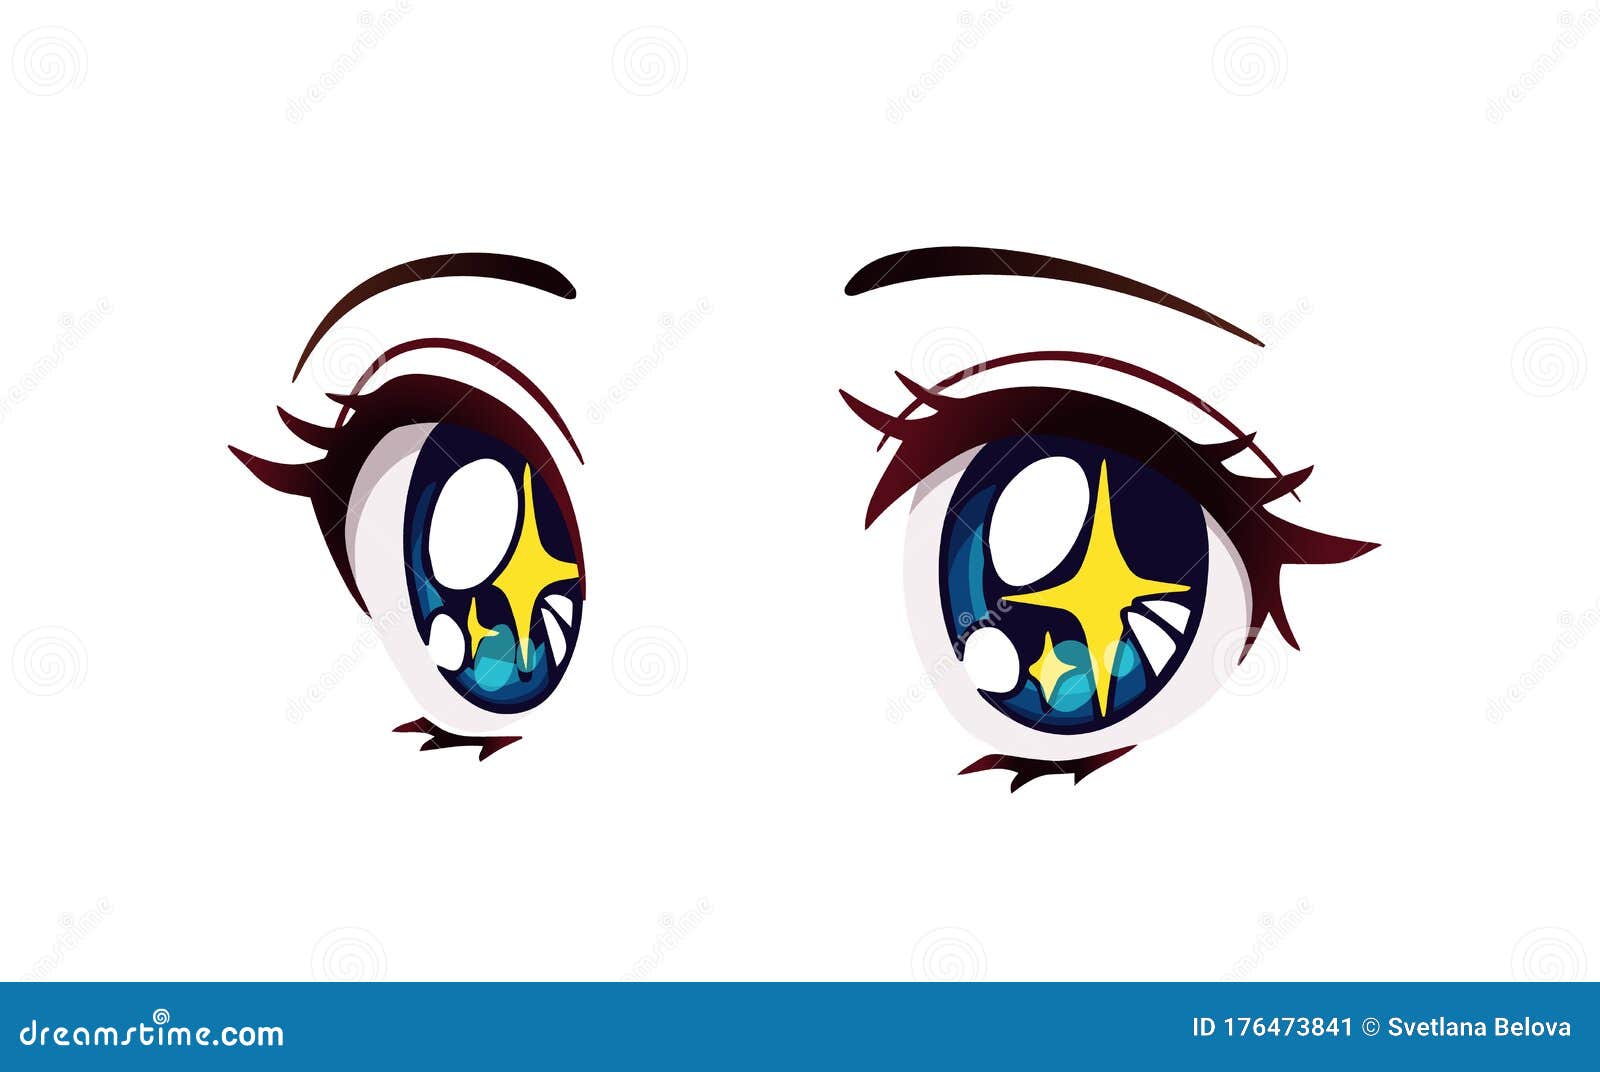 Anime Corner - Some of the most detailed anime eyes 💙, anime eyes -  thirstymag.com